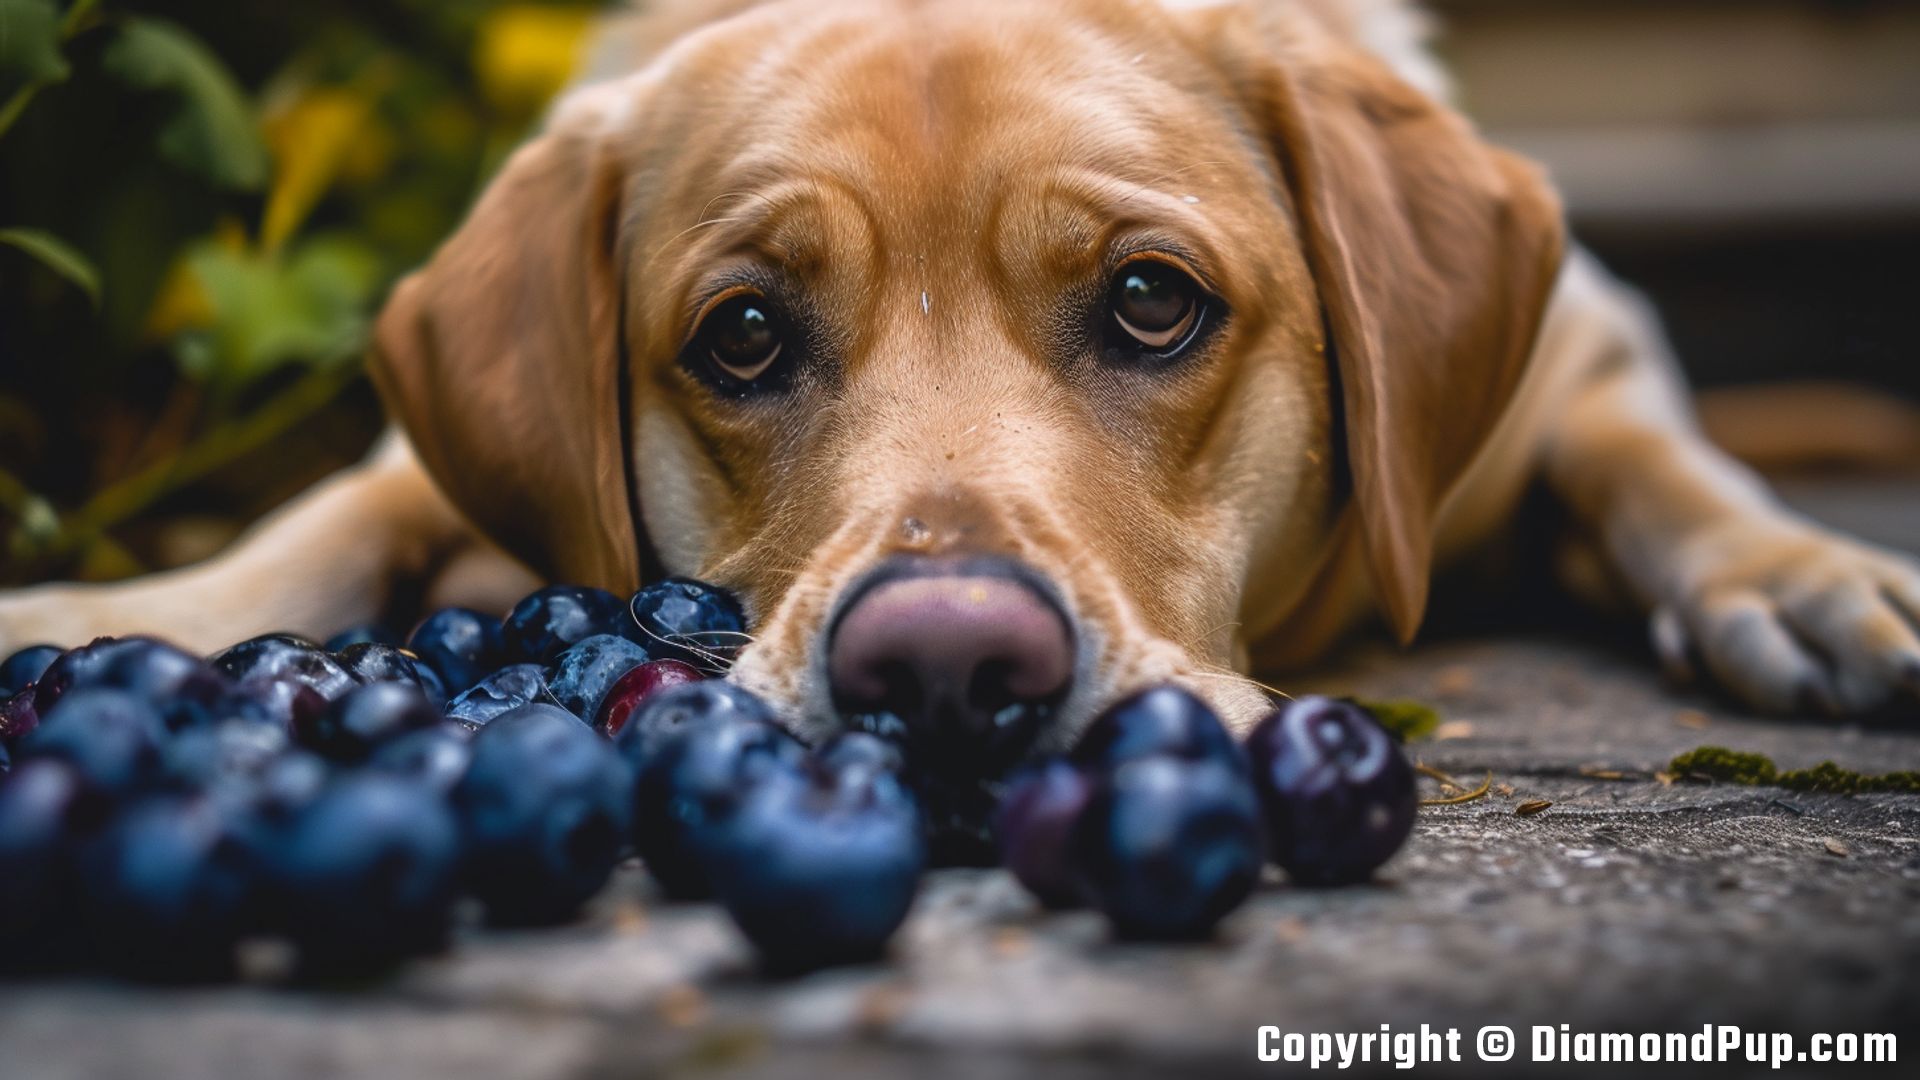 Photo of a Playful Labrador Eating Blueberries